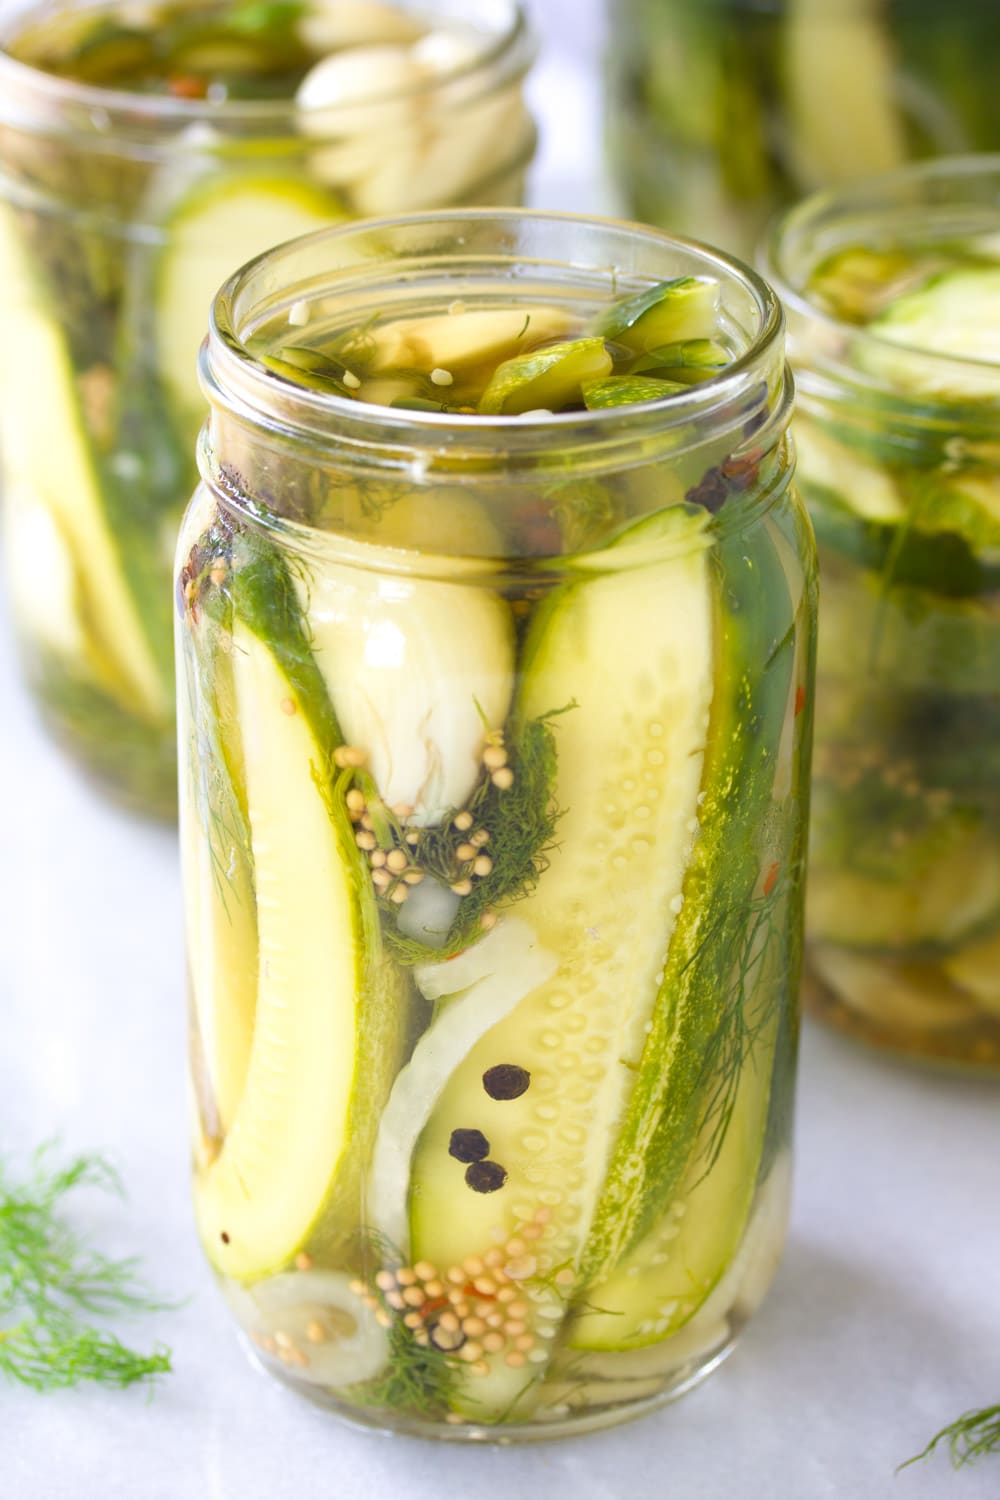 Jar of pickles on white countertop